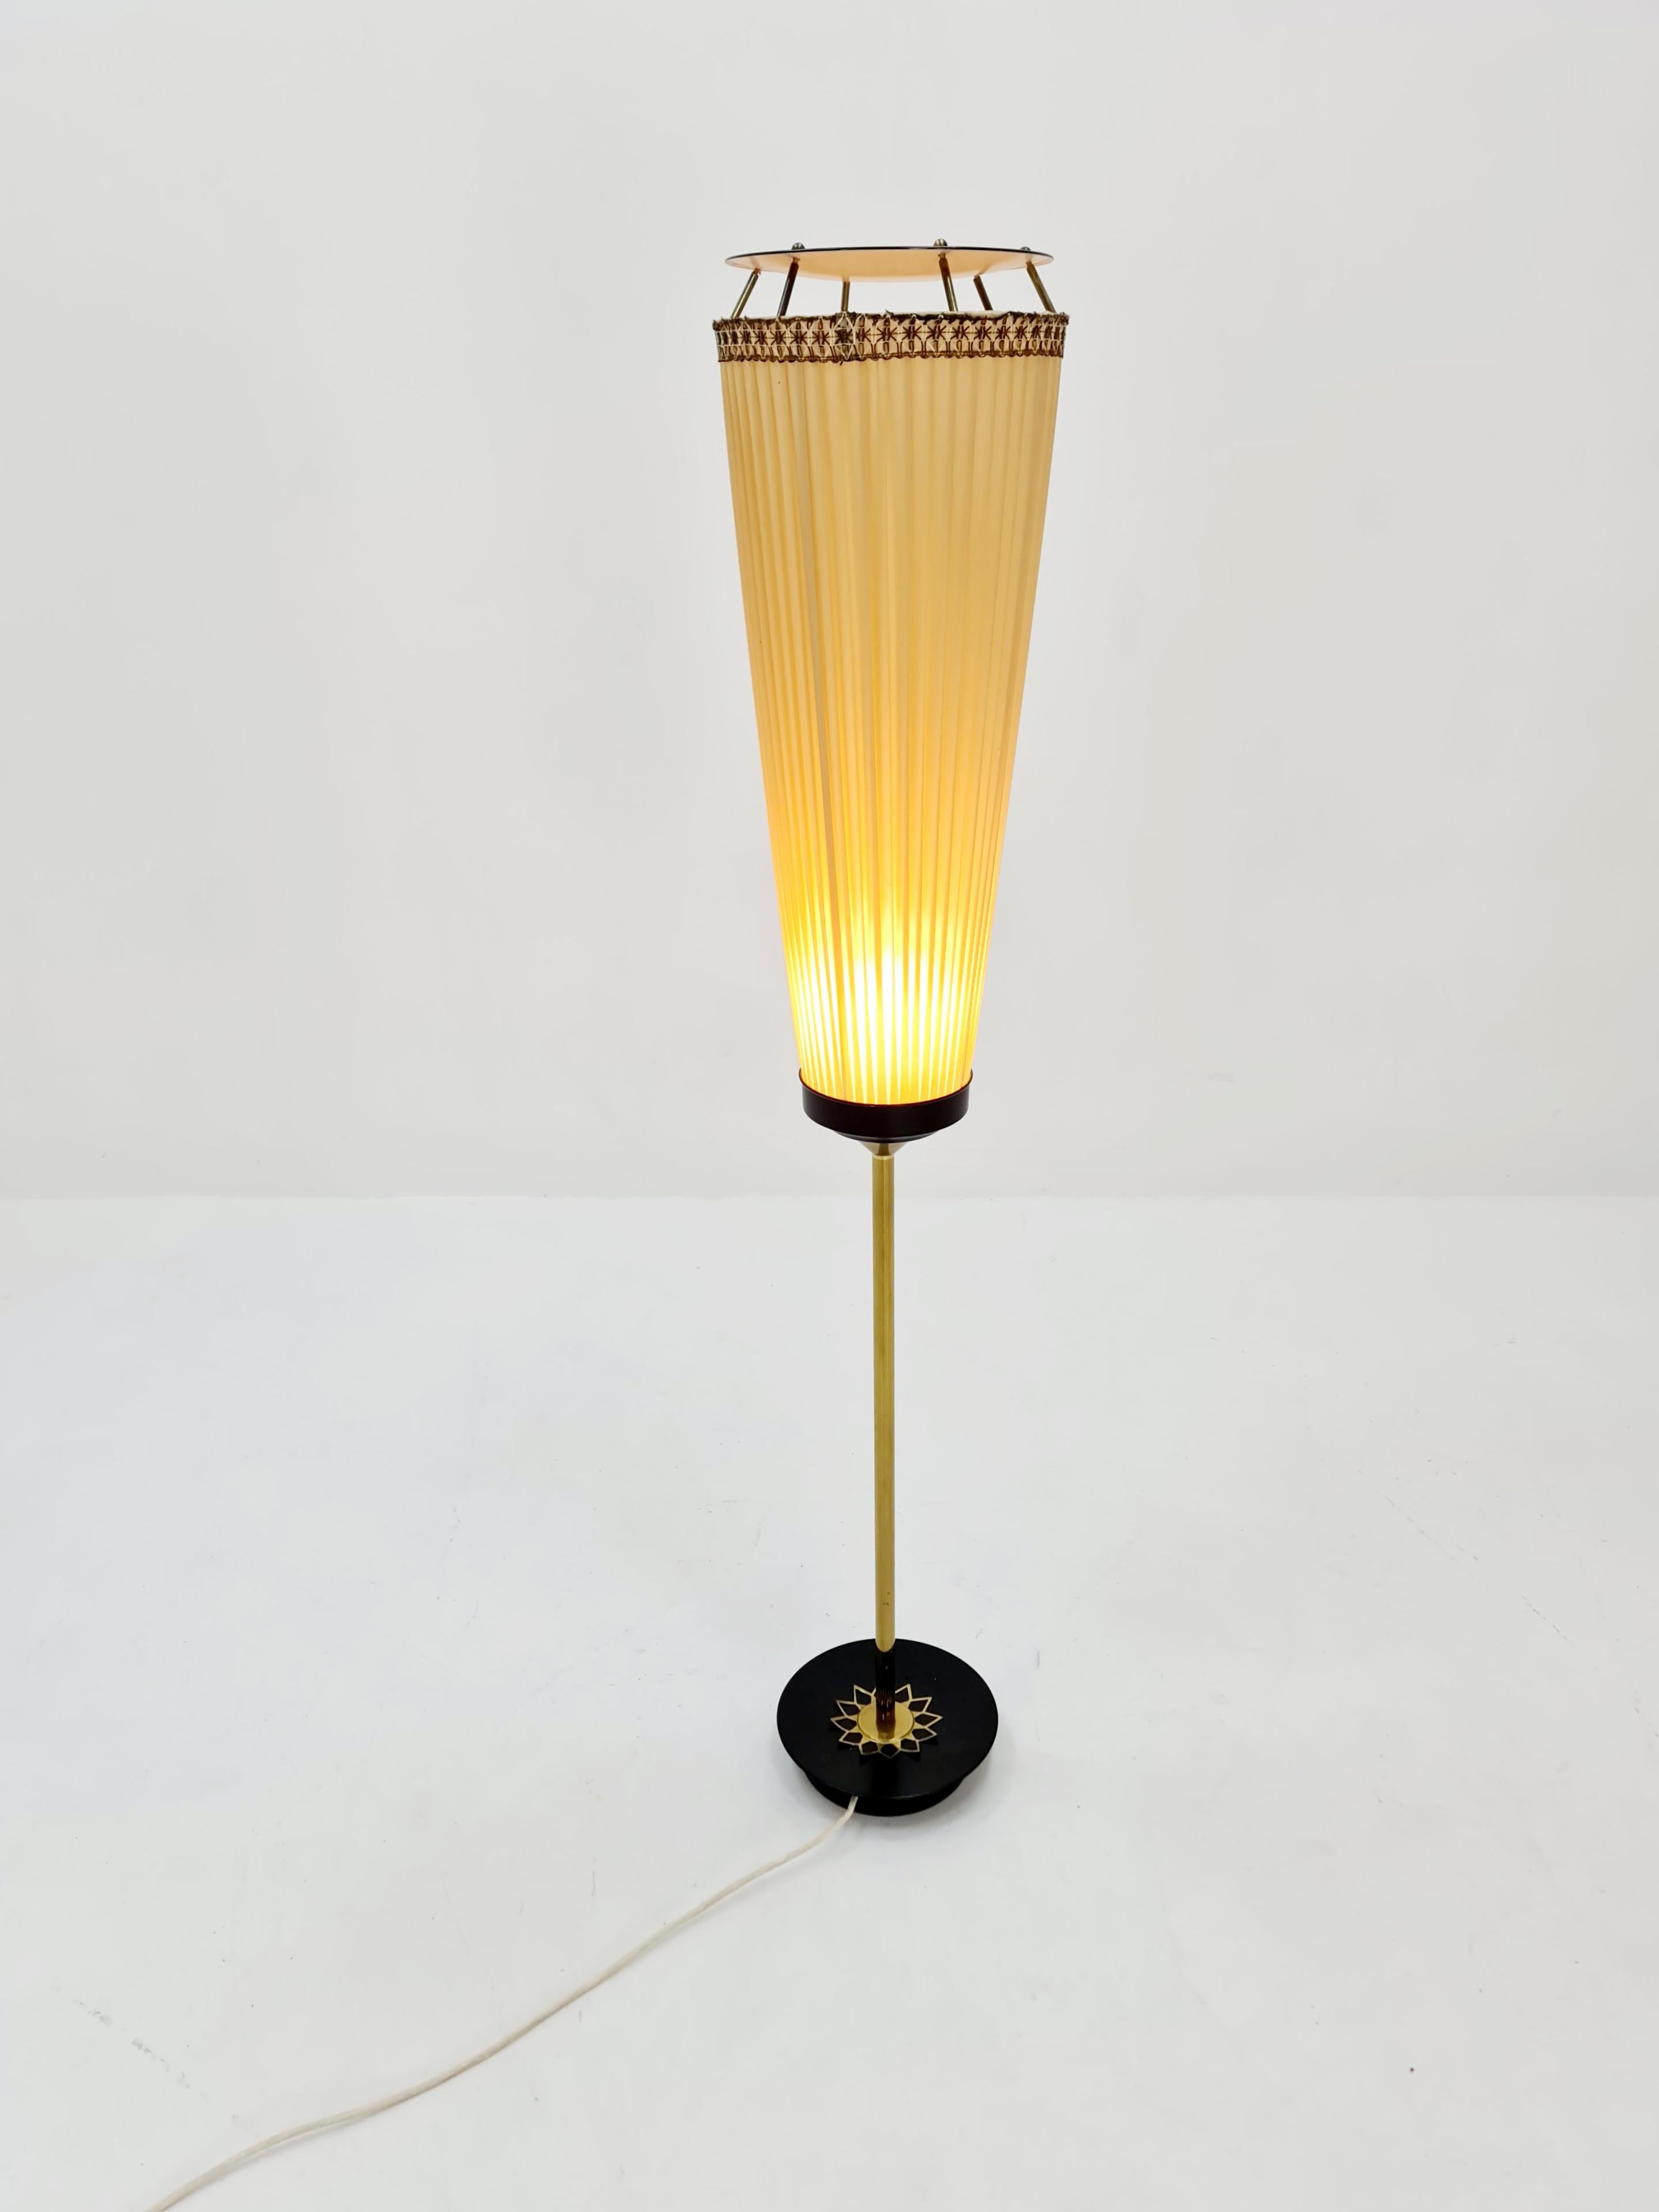 Mid century brass German floor lamp, 1960s

The frame is made of brass


Height: 140  cm
Diameter  : : 26 cm 
shade Height : 64  cm 
Good condition with old signs of wear